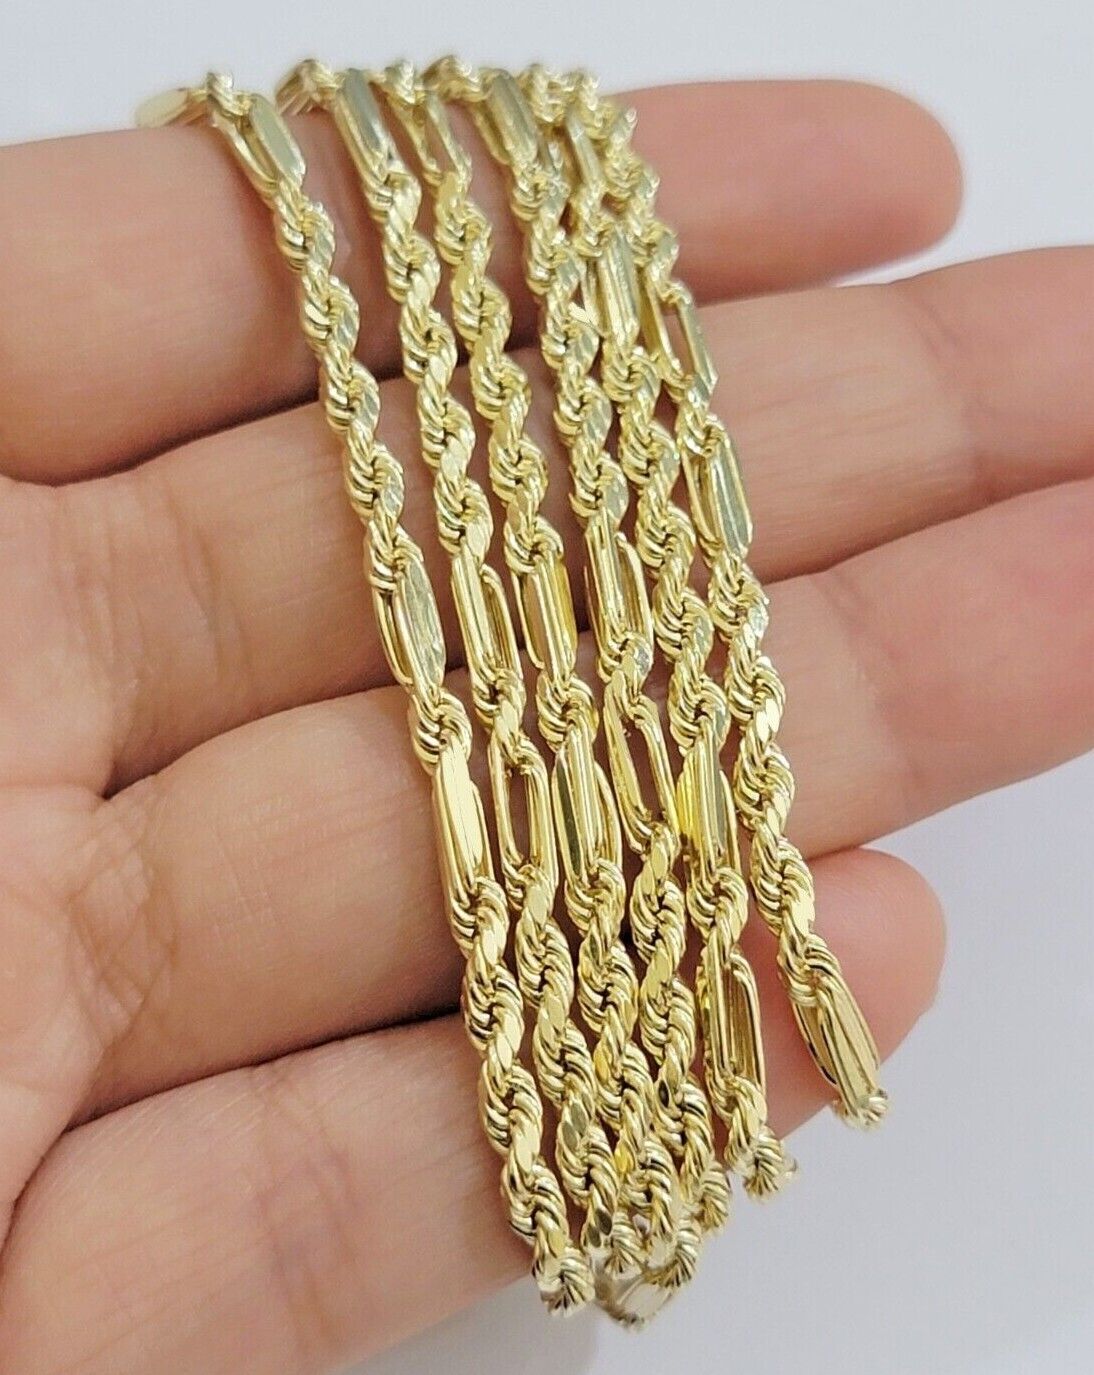 Real 10k Yellow Gold Milano Rope Chain Necklace 18